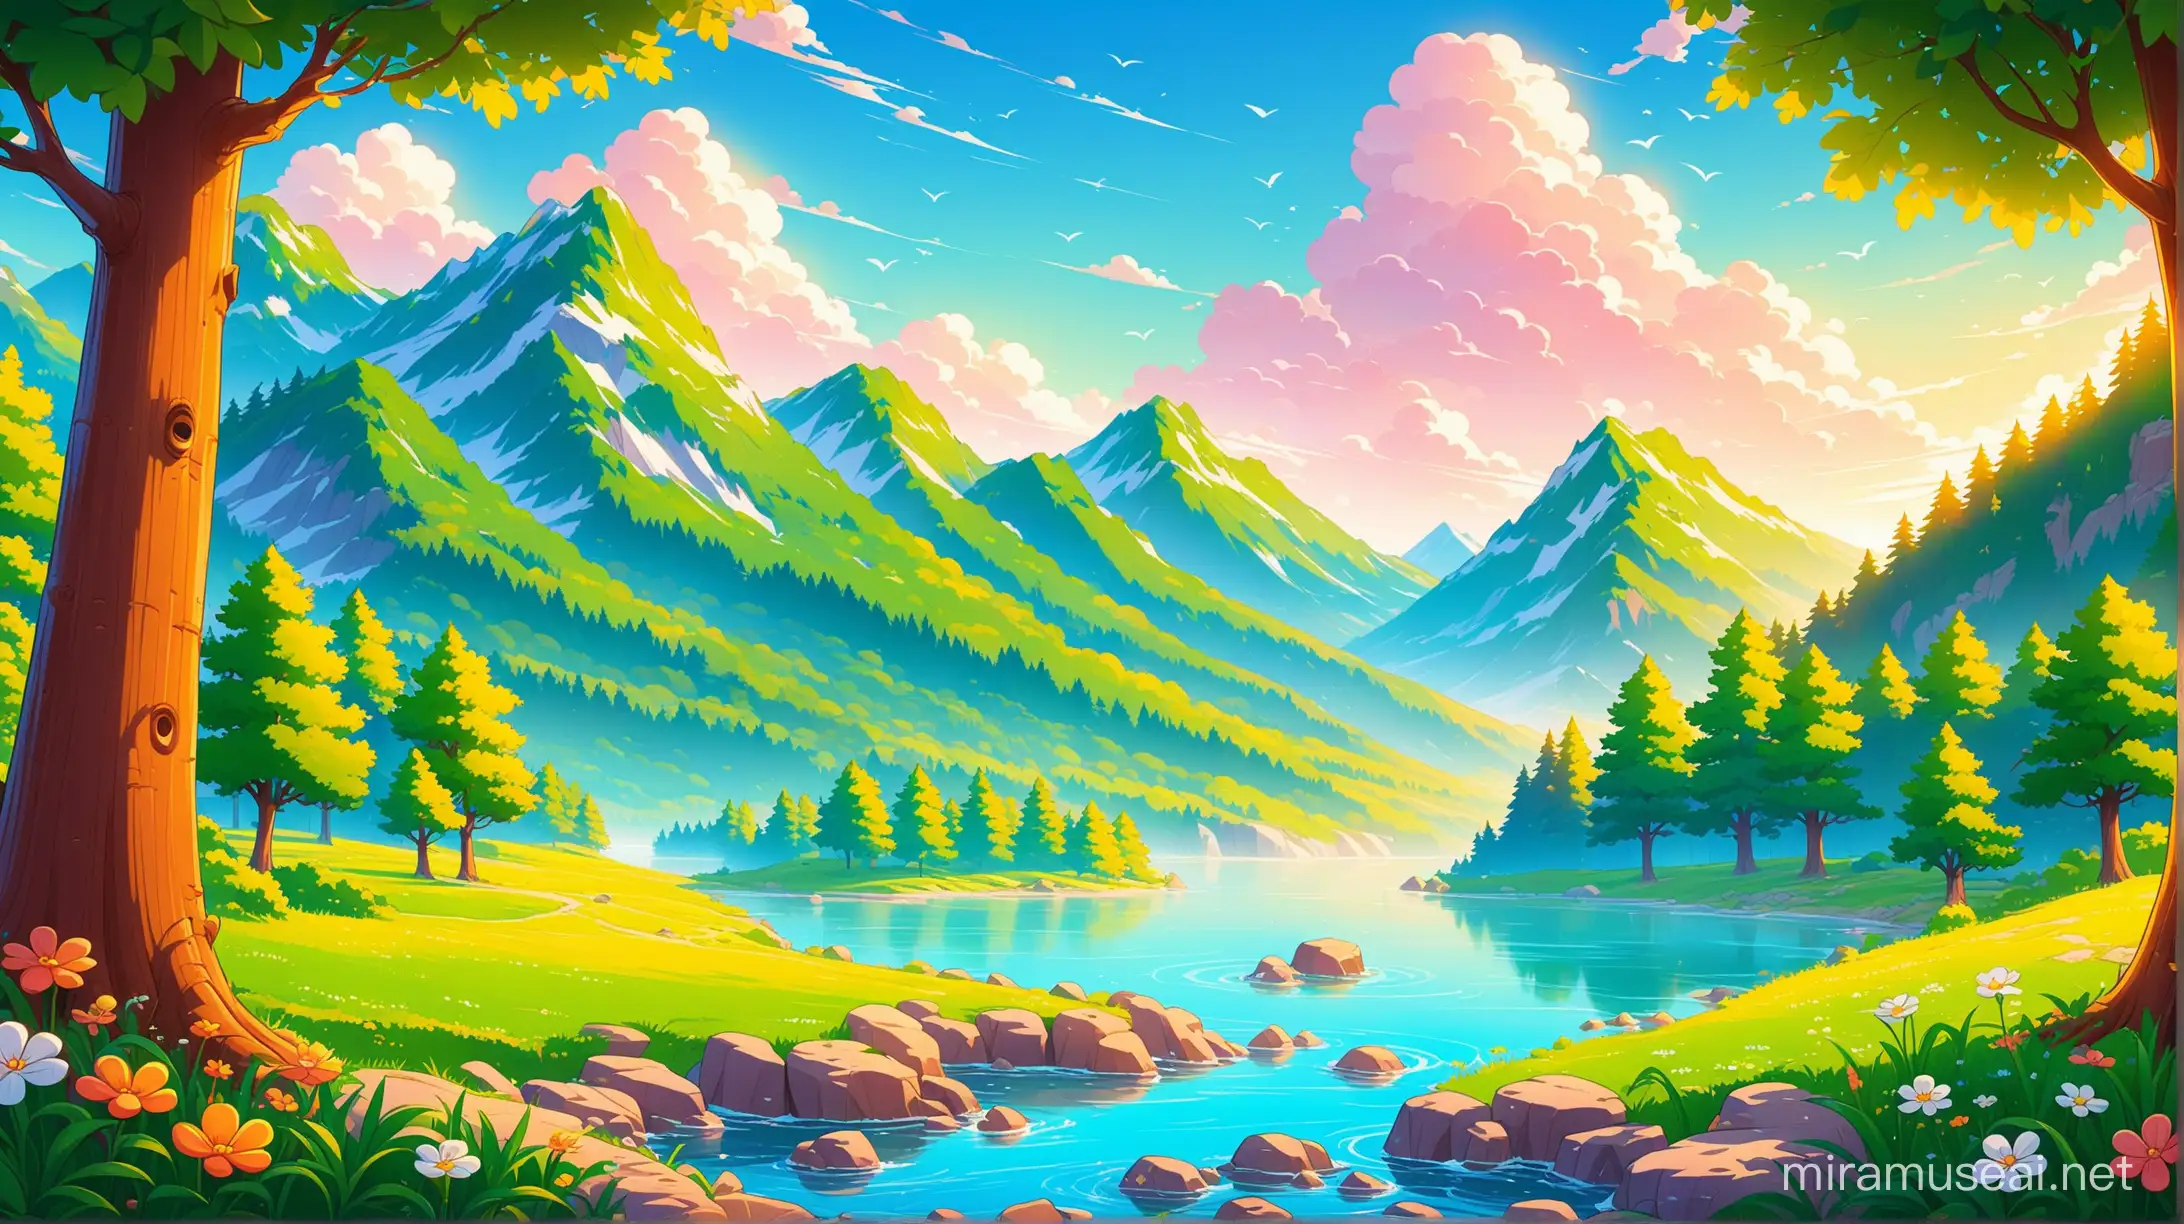 Colorful Cartoon Nature Scene with Playful Animals